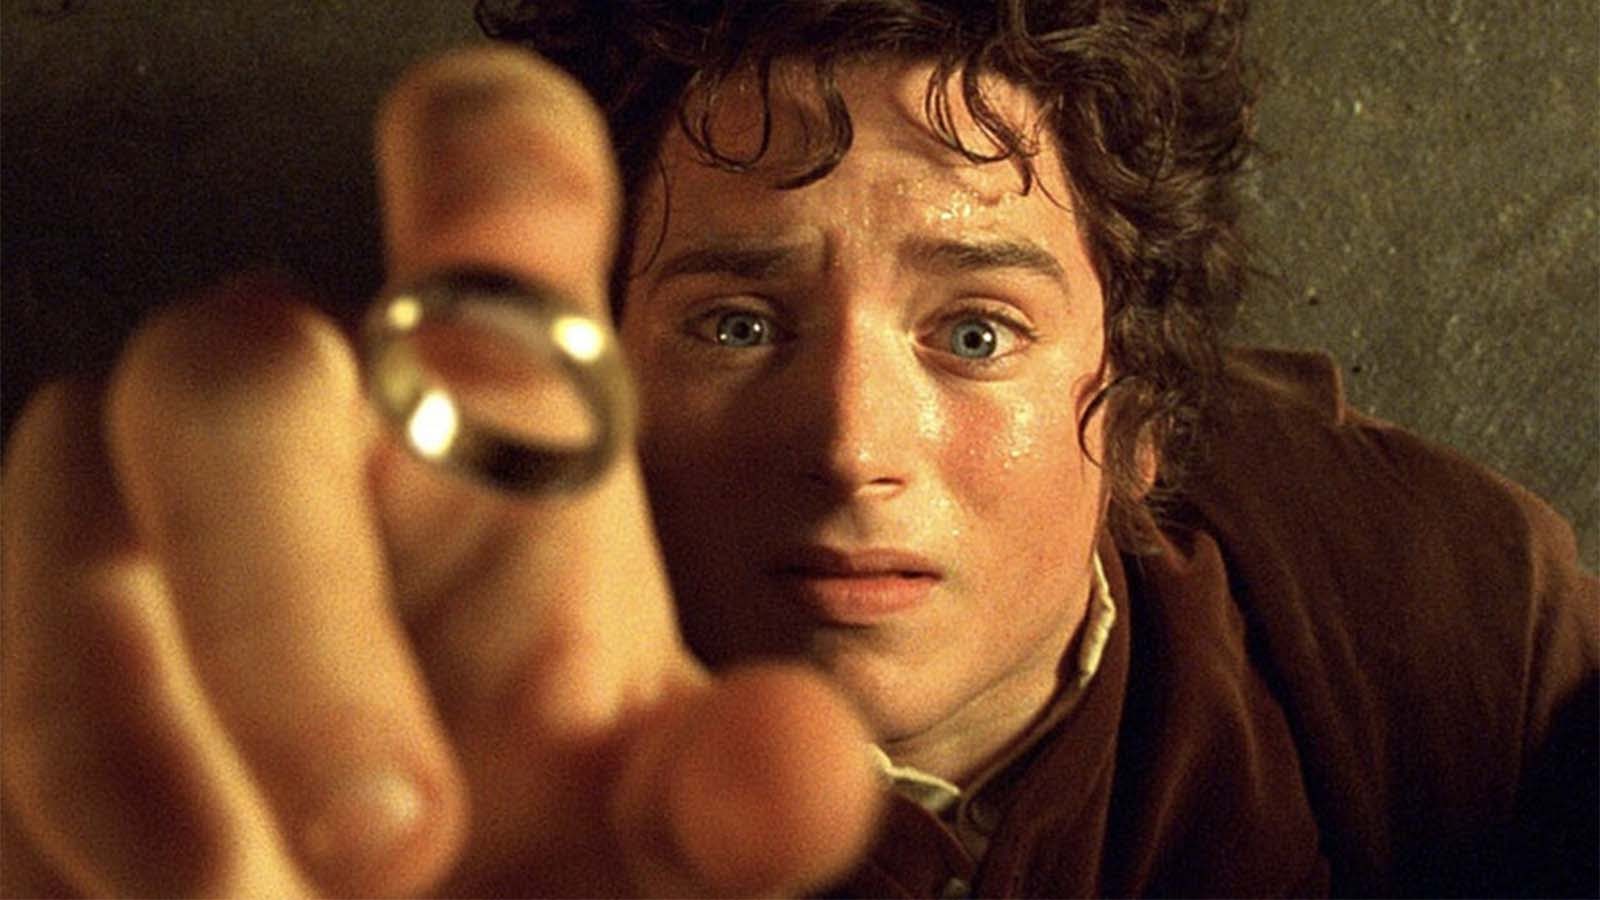 Frodo catches the ring in slow-motion. Image © New Line Cinema